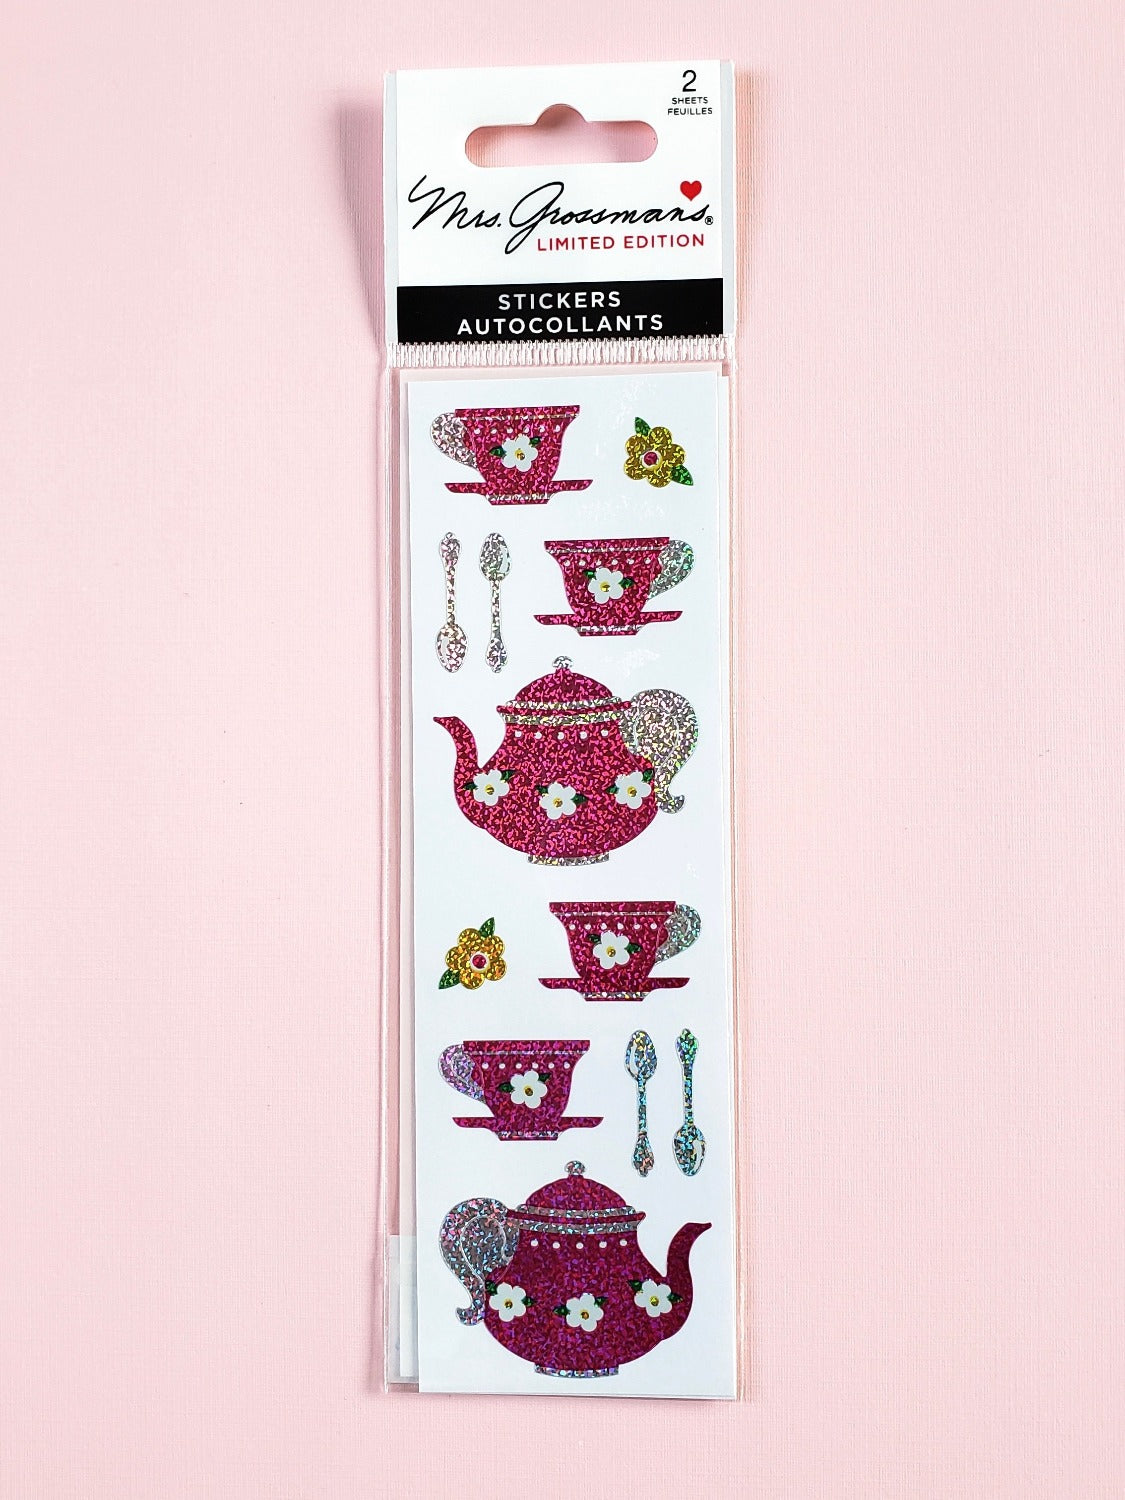 Mrs Grossman's sparkly stickers limited edition tea set